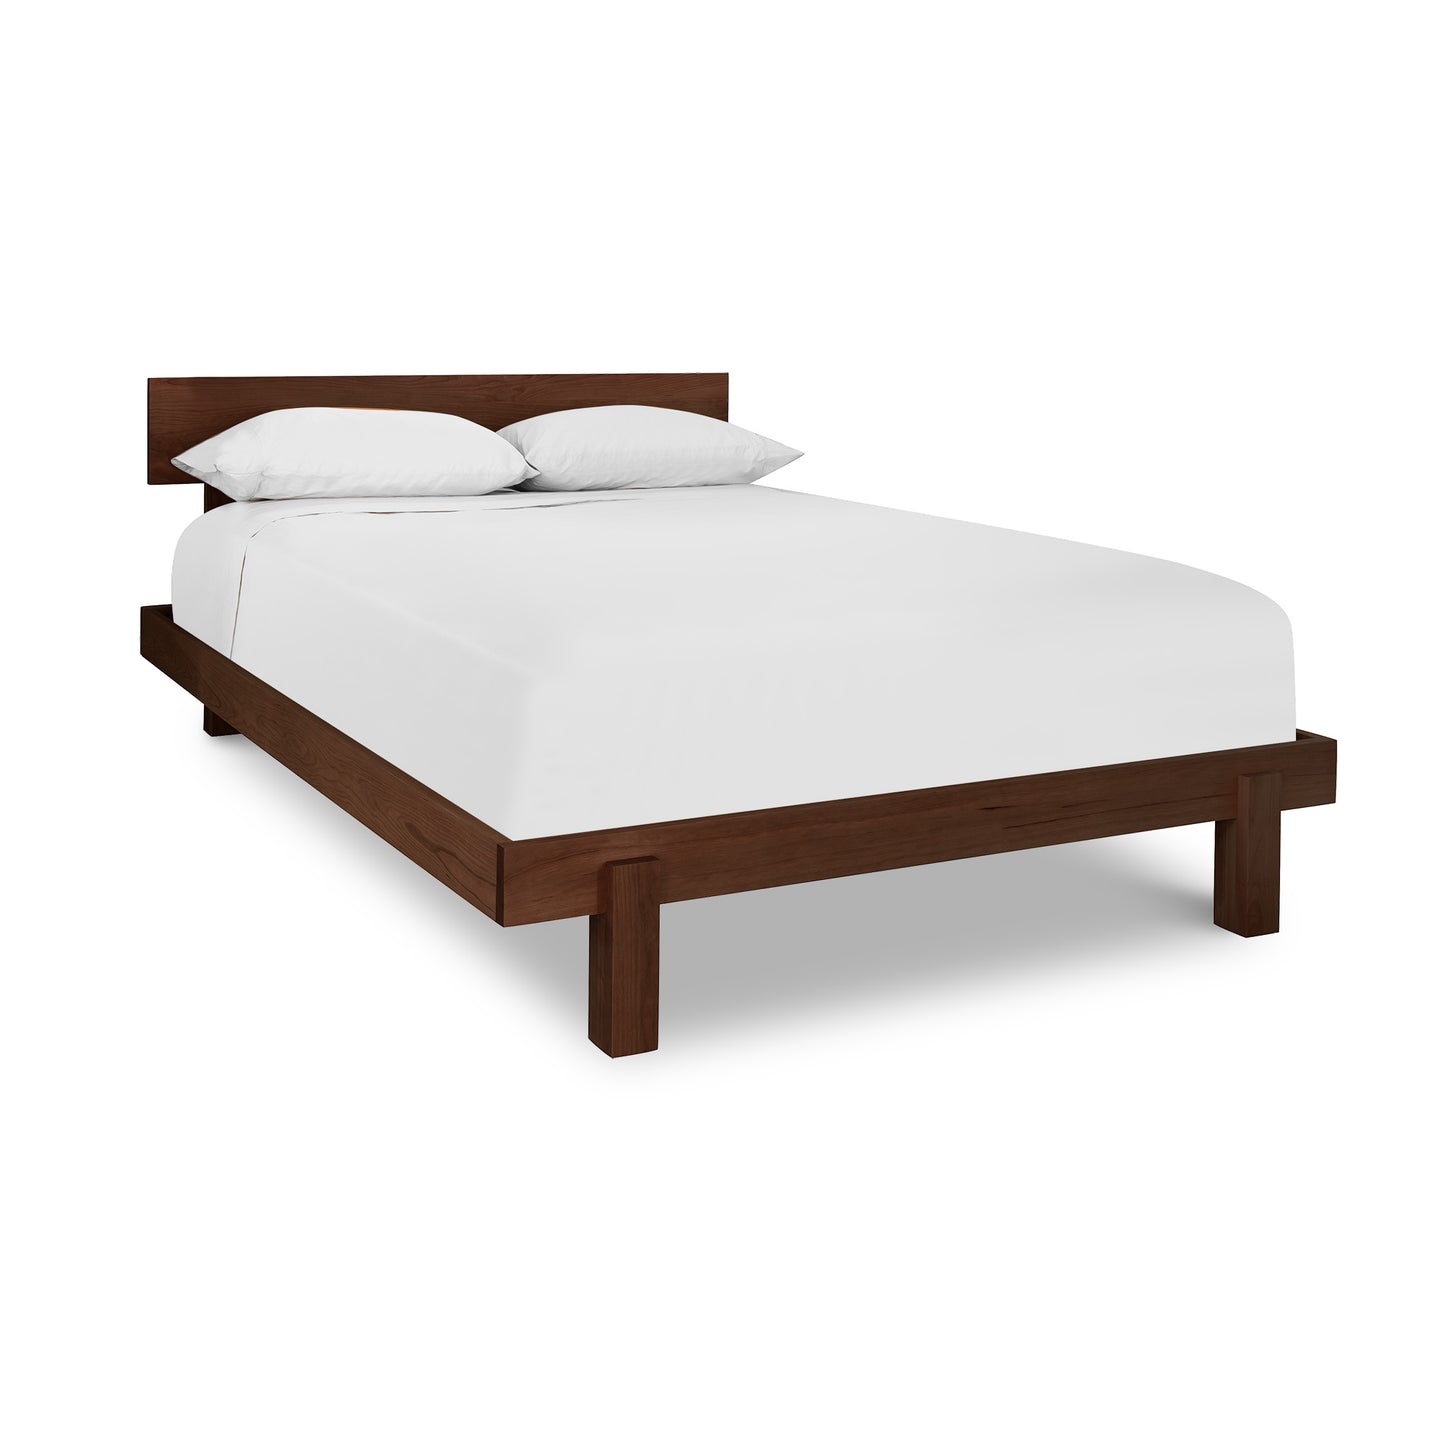 A Kipling Bed by Vermont Furniture Designs with a wooden frame and white sheets made from solid wood.